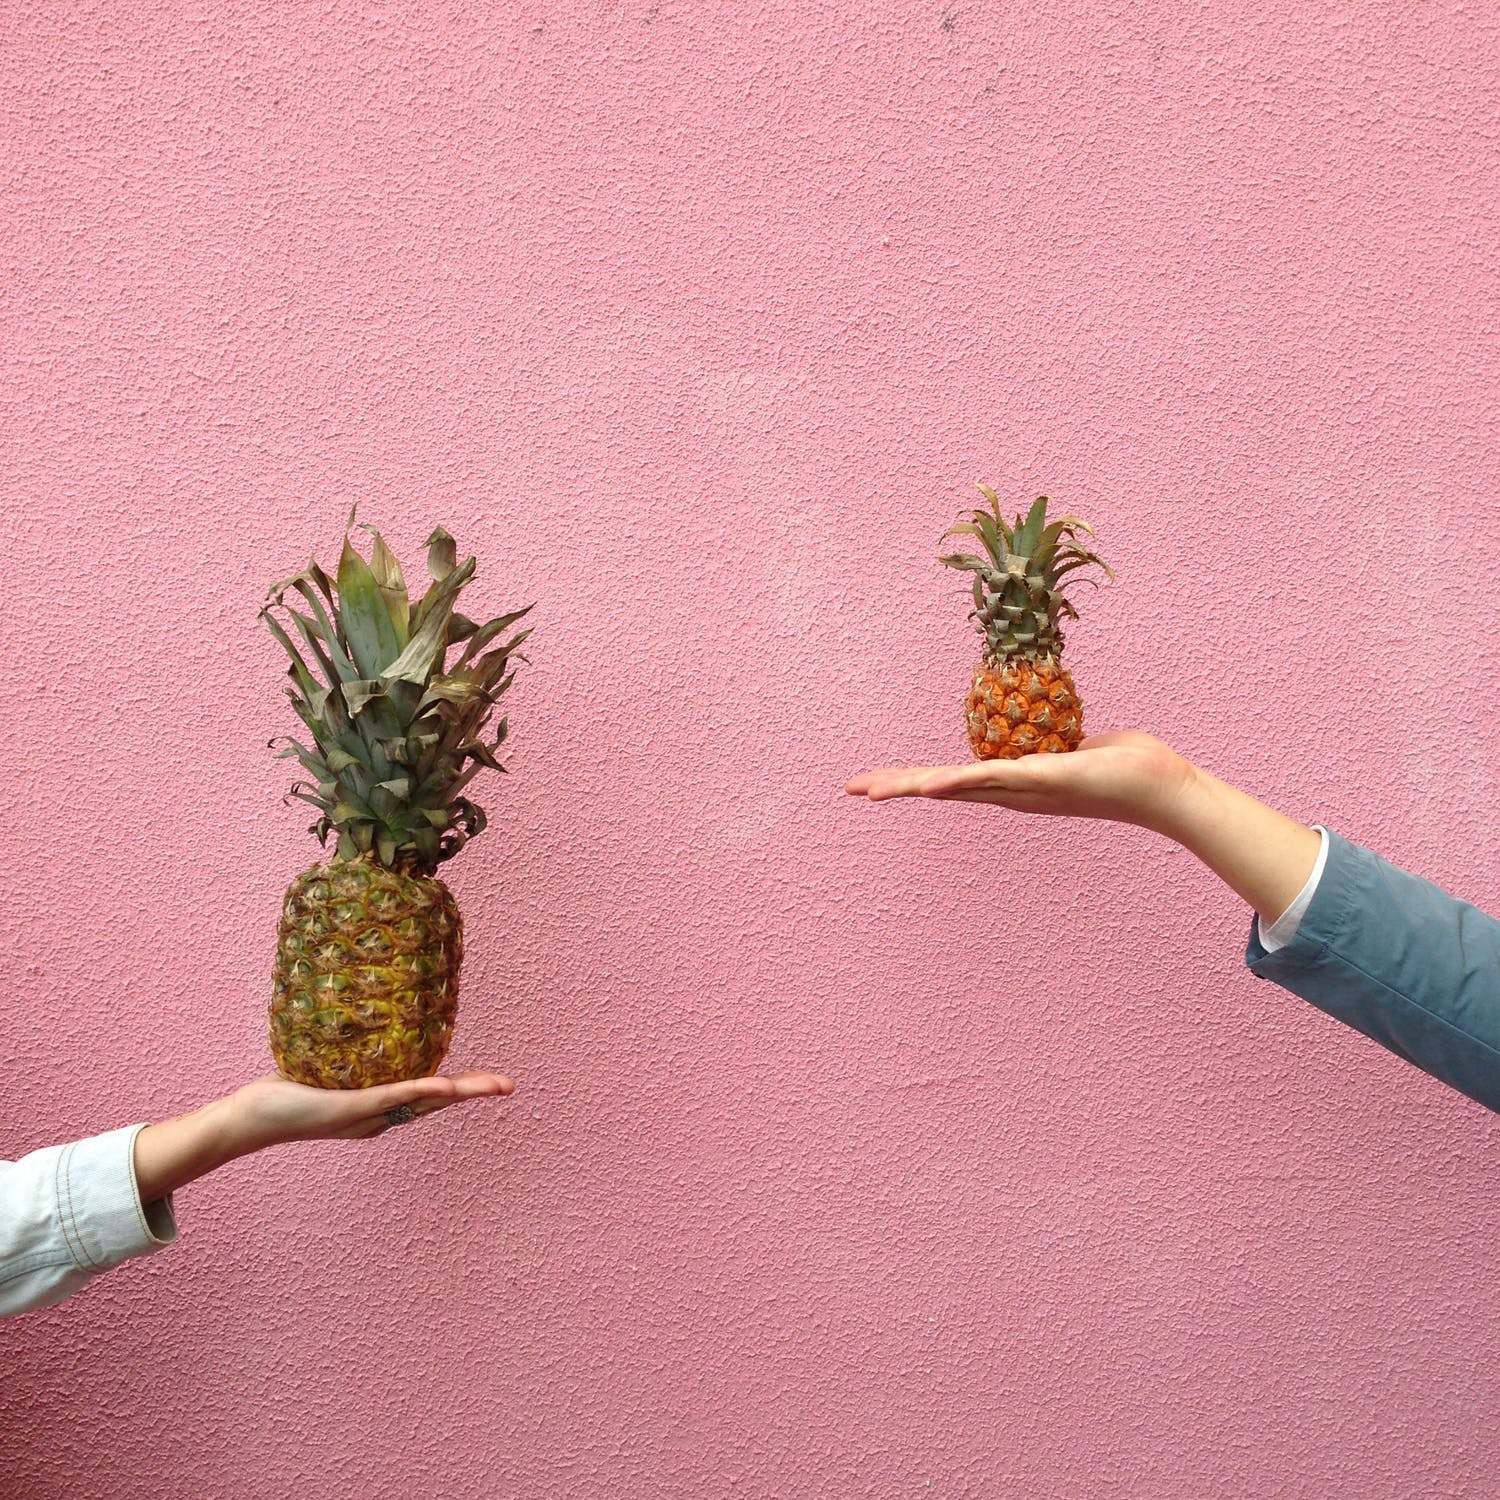 image of a smaller pineapple by comparison